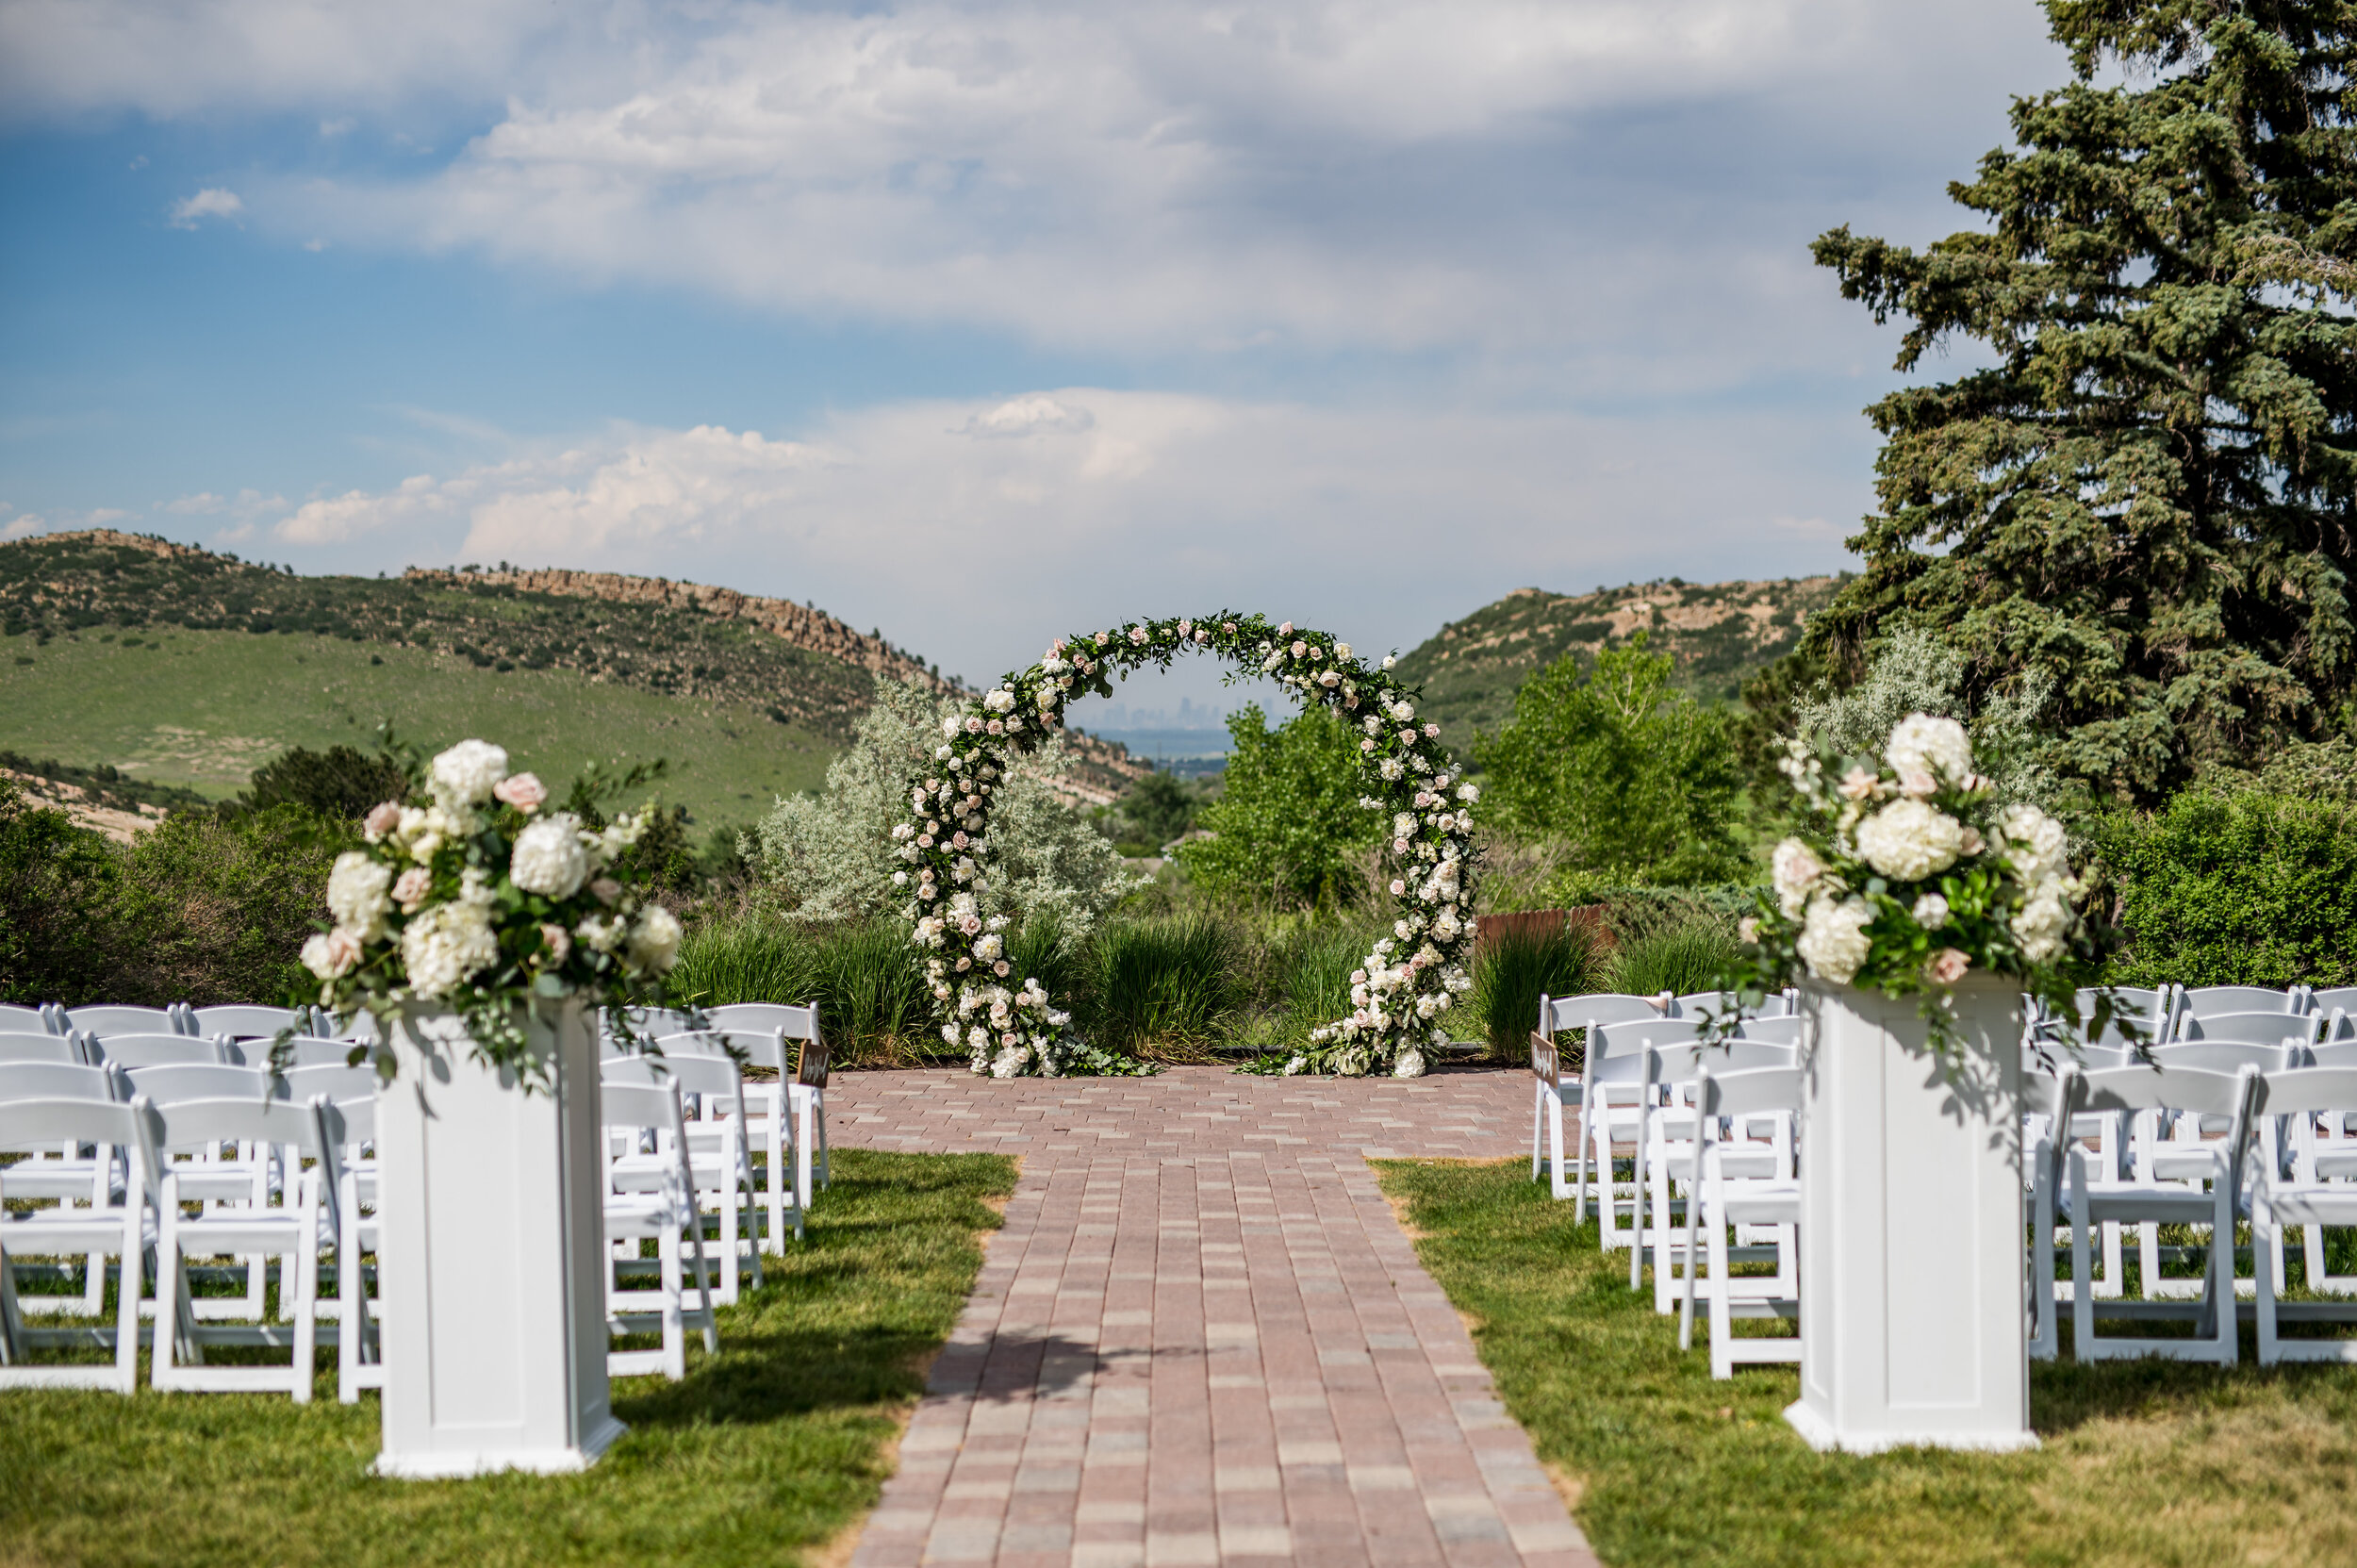  Victoria and Anthony’s Colorado outdoor summer wedding in Hayley Paige Markle wedding dress 